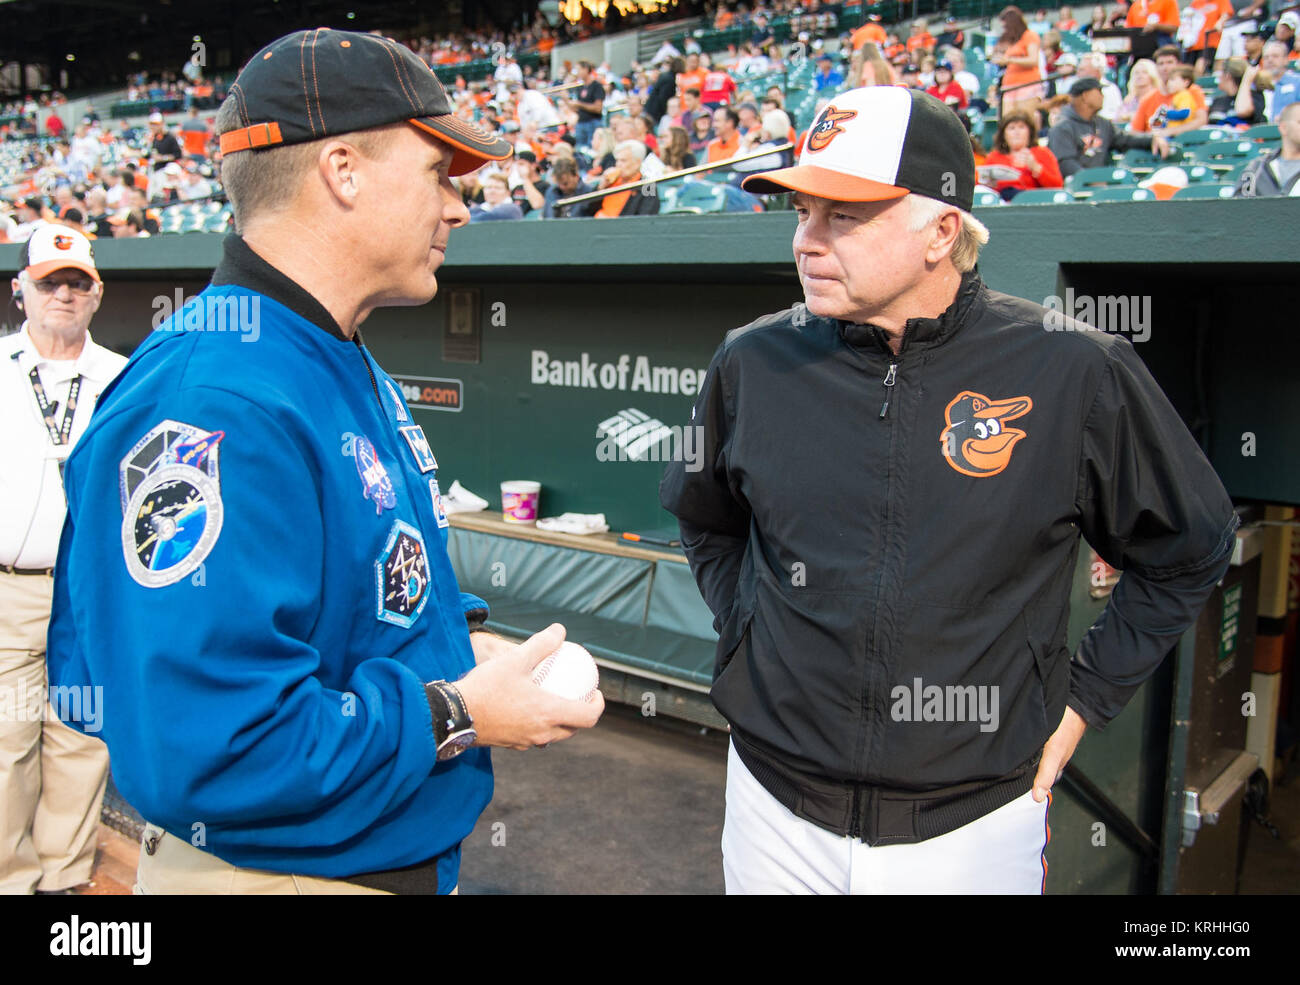 NASA astronaut and Maryland native Terry Virts, left, talks with Baltimore Orioles manager Buck Showalter after throwing out the first pitch before the Boston Red Sox take on the Baltimore Orioles at Camden Yards in Baltimore, Md. on Monday, September 14, 2015.  Virts spend 199 days aboard the International Space Station from November 2014 to June 2015 as part of Expeditions 42 and 43, serving as commander of Expedition 43.  Photo Credit: (NASA/Joel Kowsky) Astronaut Terry Virts Orioles First Pitch (NHQ201509140015) Stock Photo